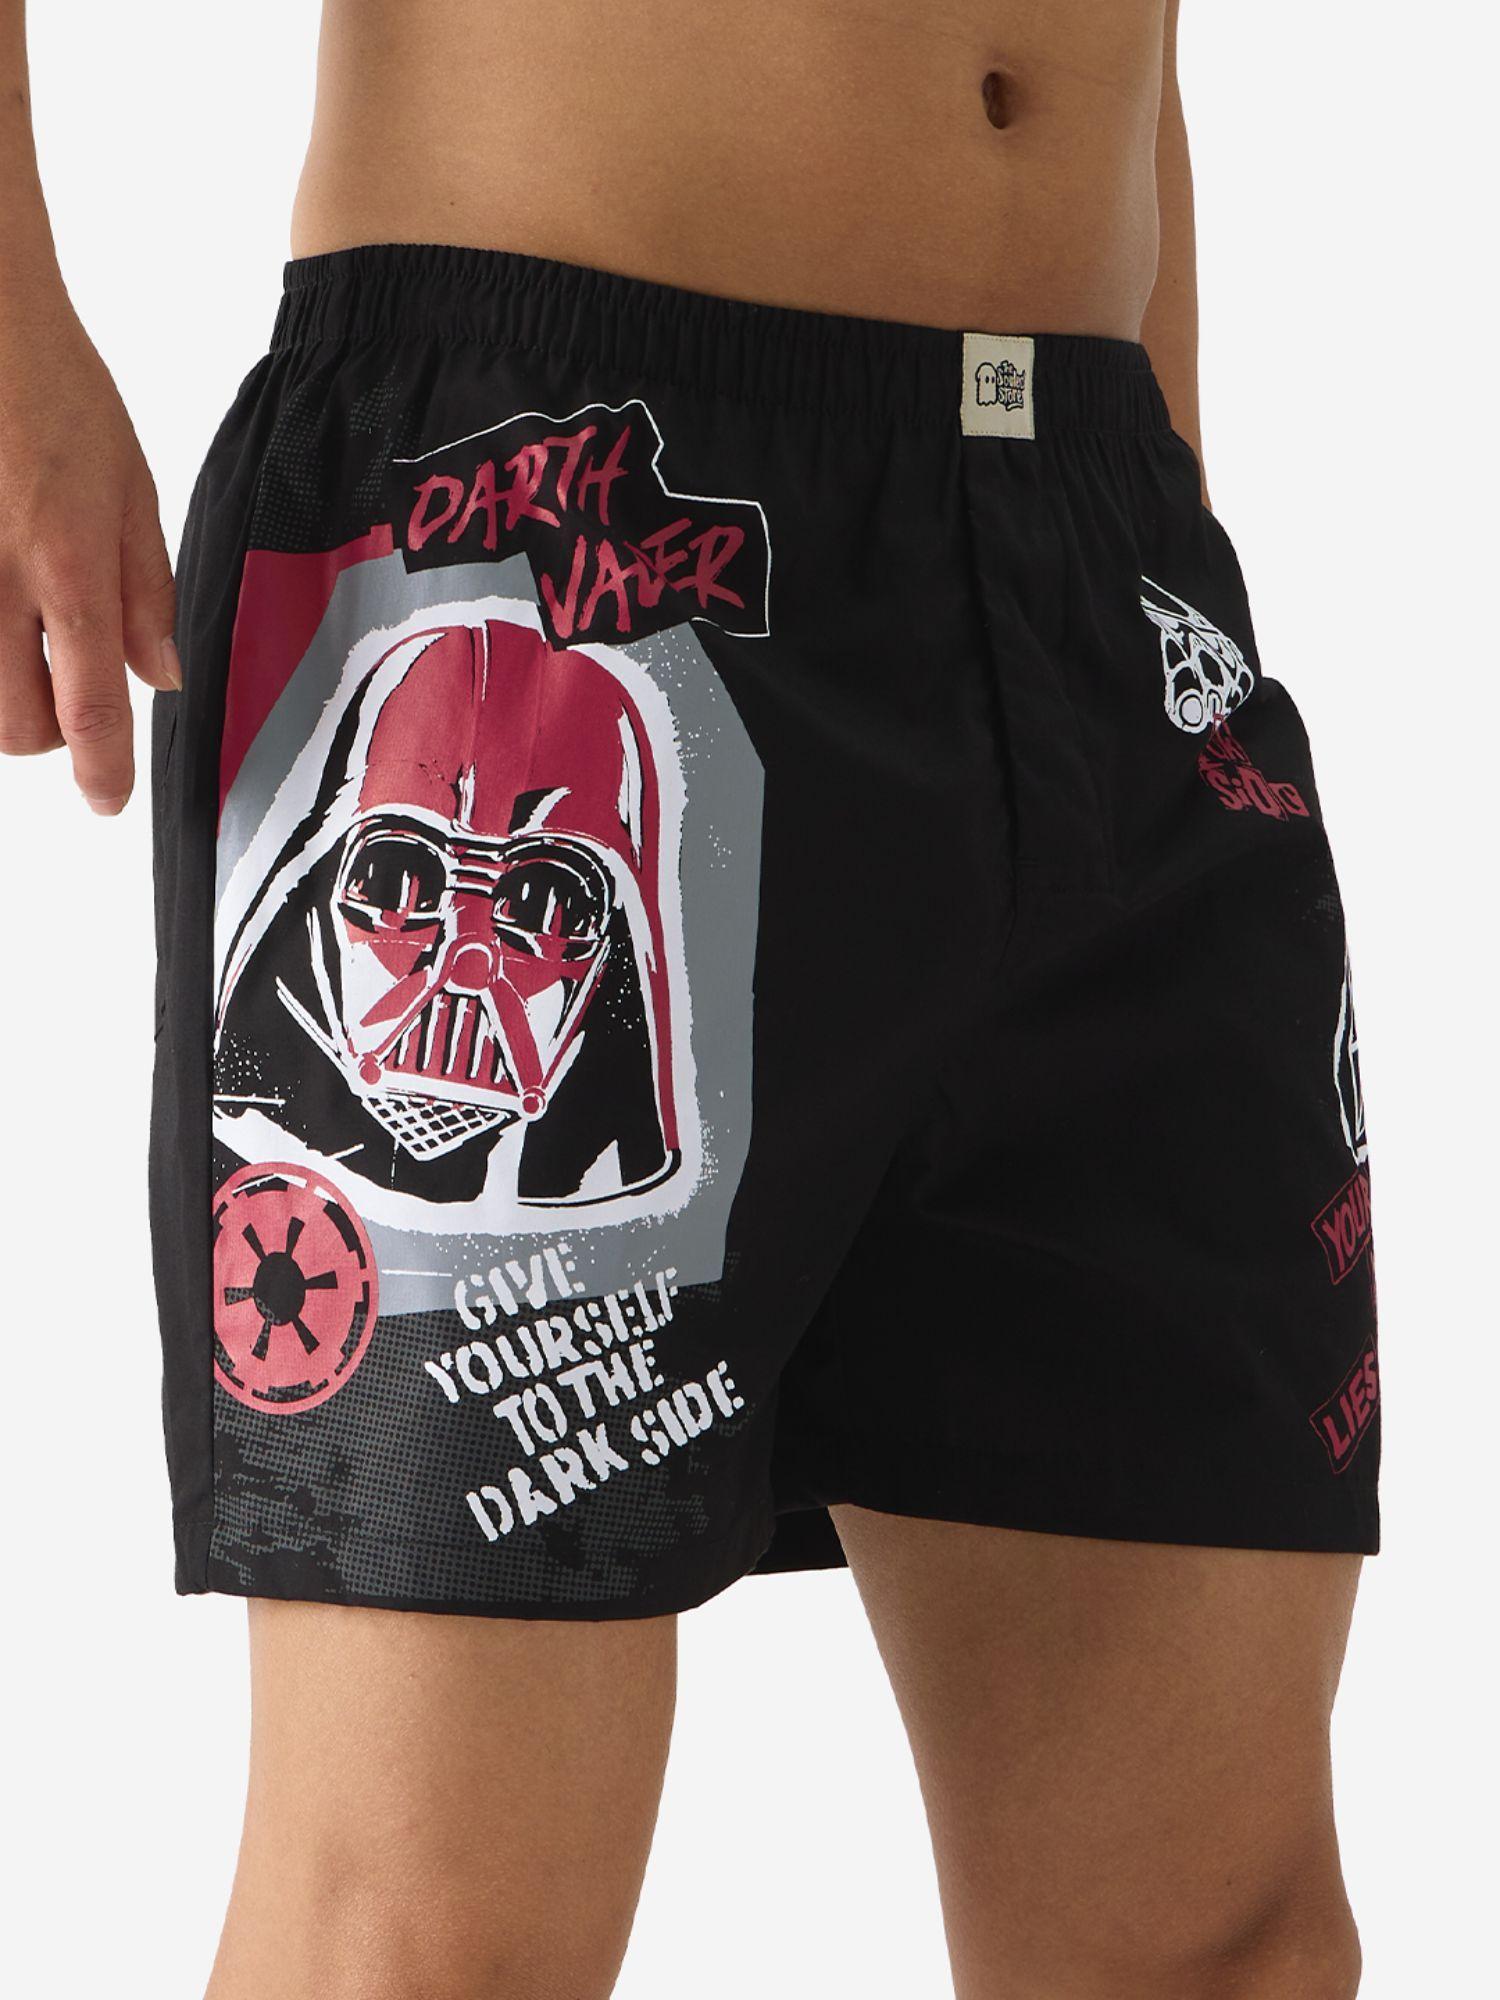 the soulted store official star wars dark side boxer shorts